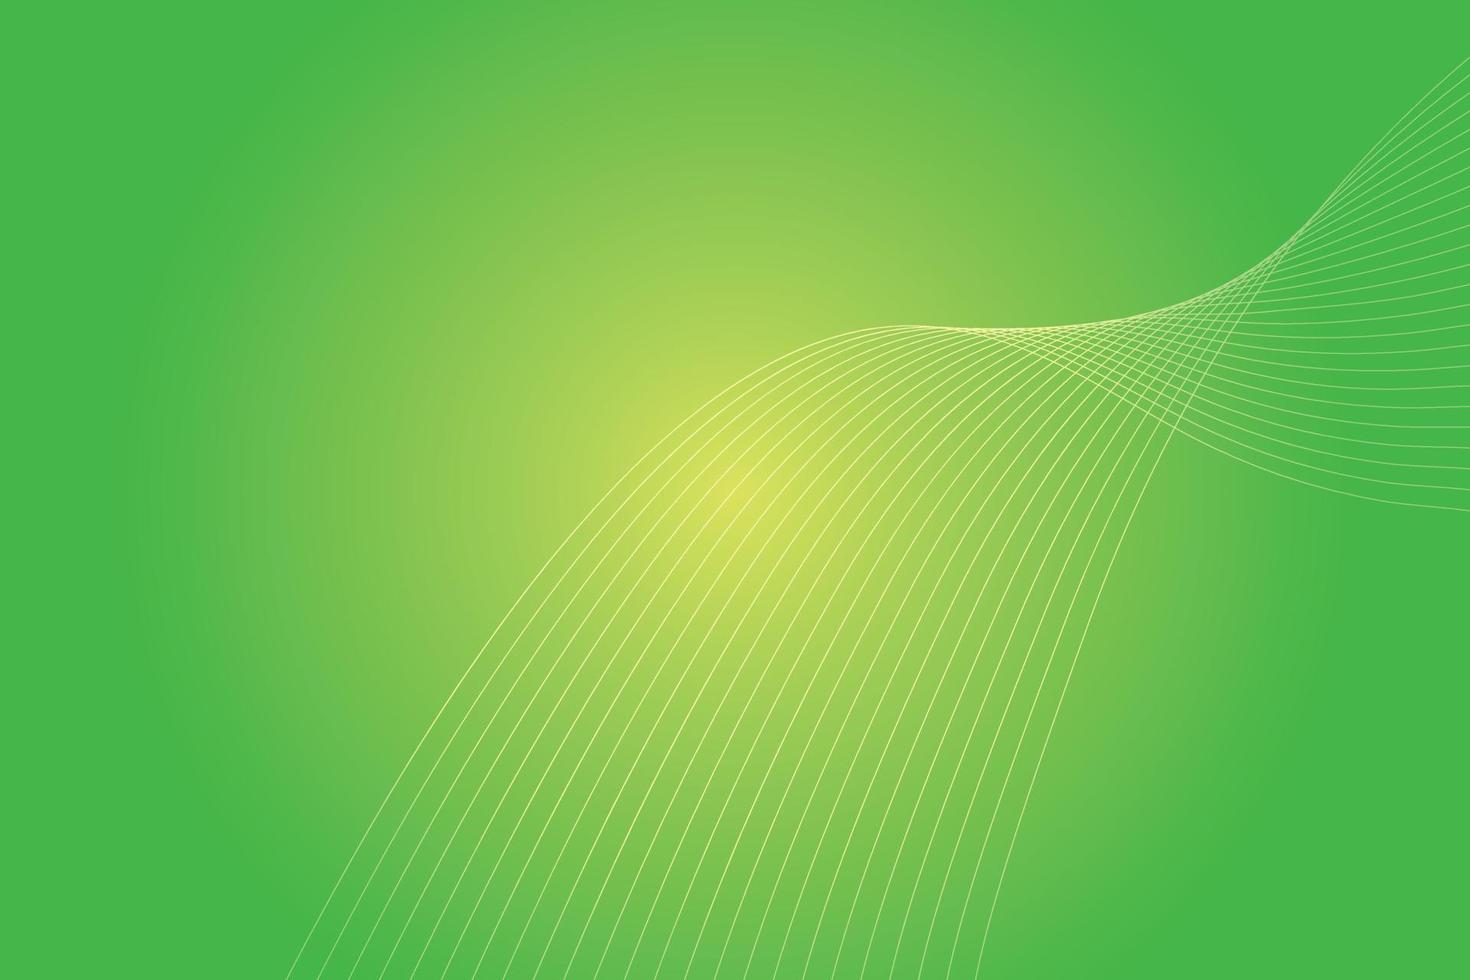 Abstract background with colorful wavy lines. Abstract green yellow gradient background design vector